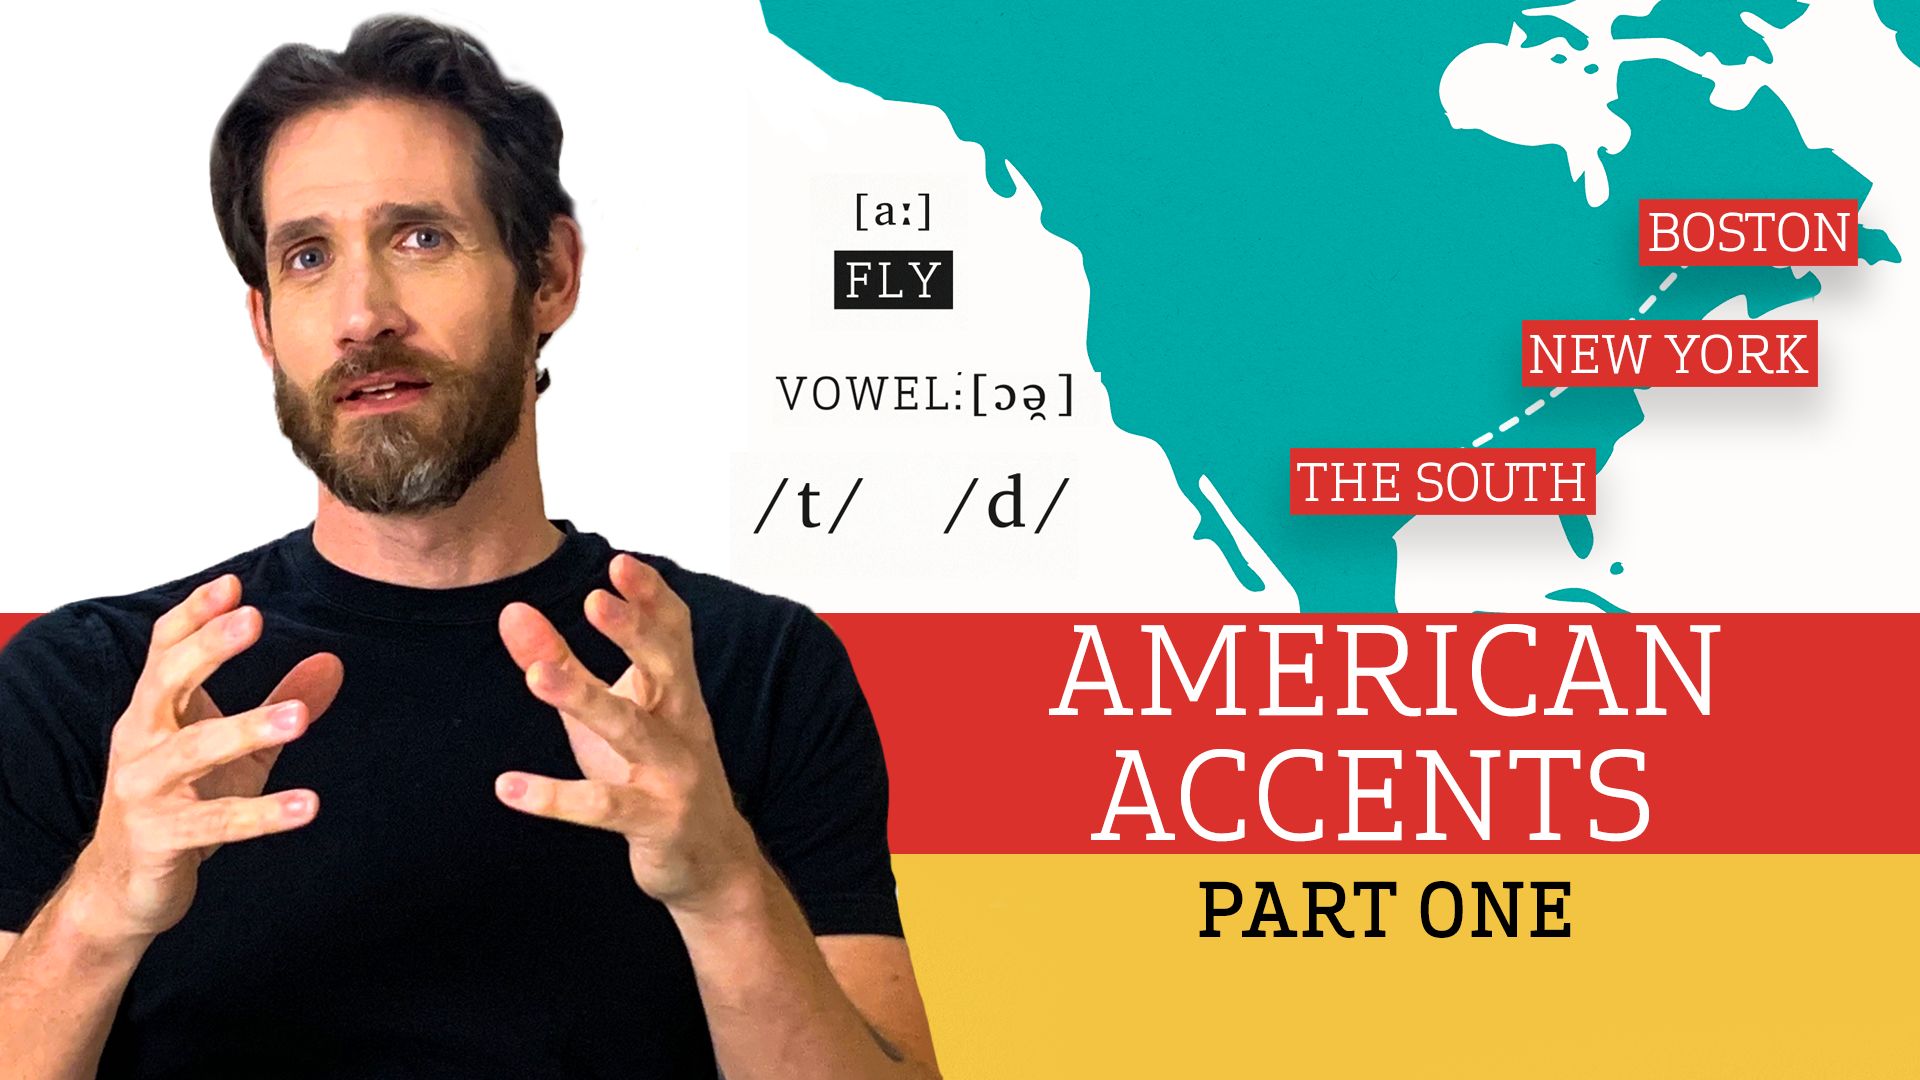 Accent vs. Dialect vs. Language: What's the Difference?